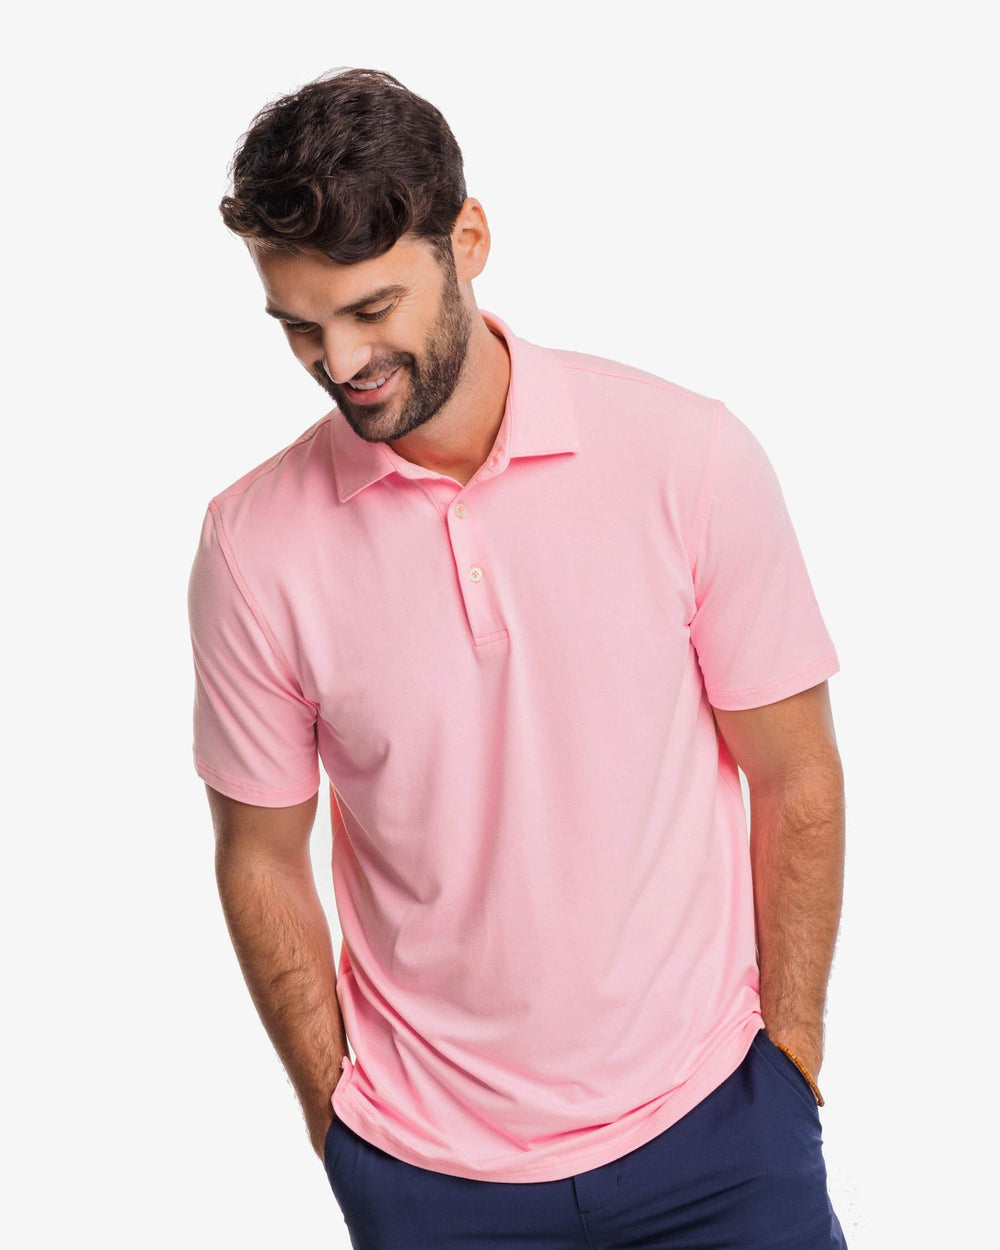 Ryder Lilly Polo Shirt